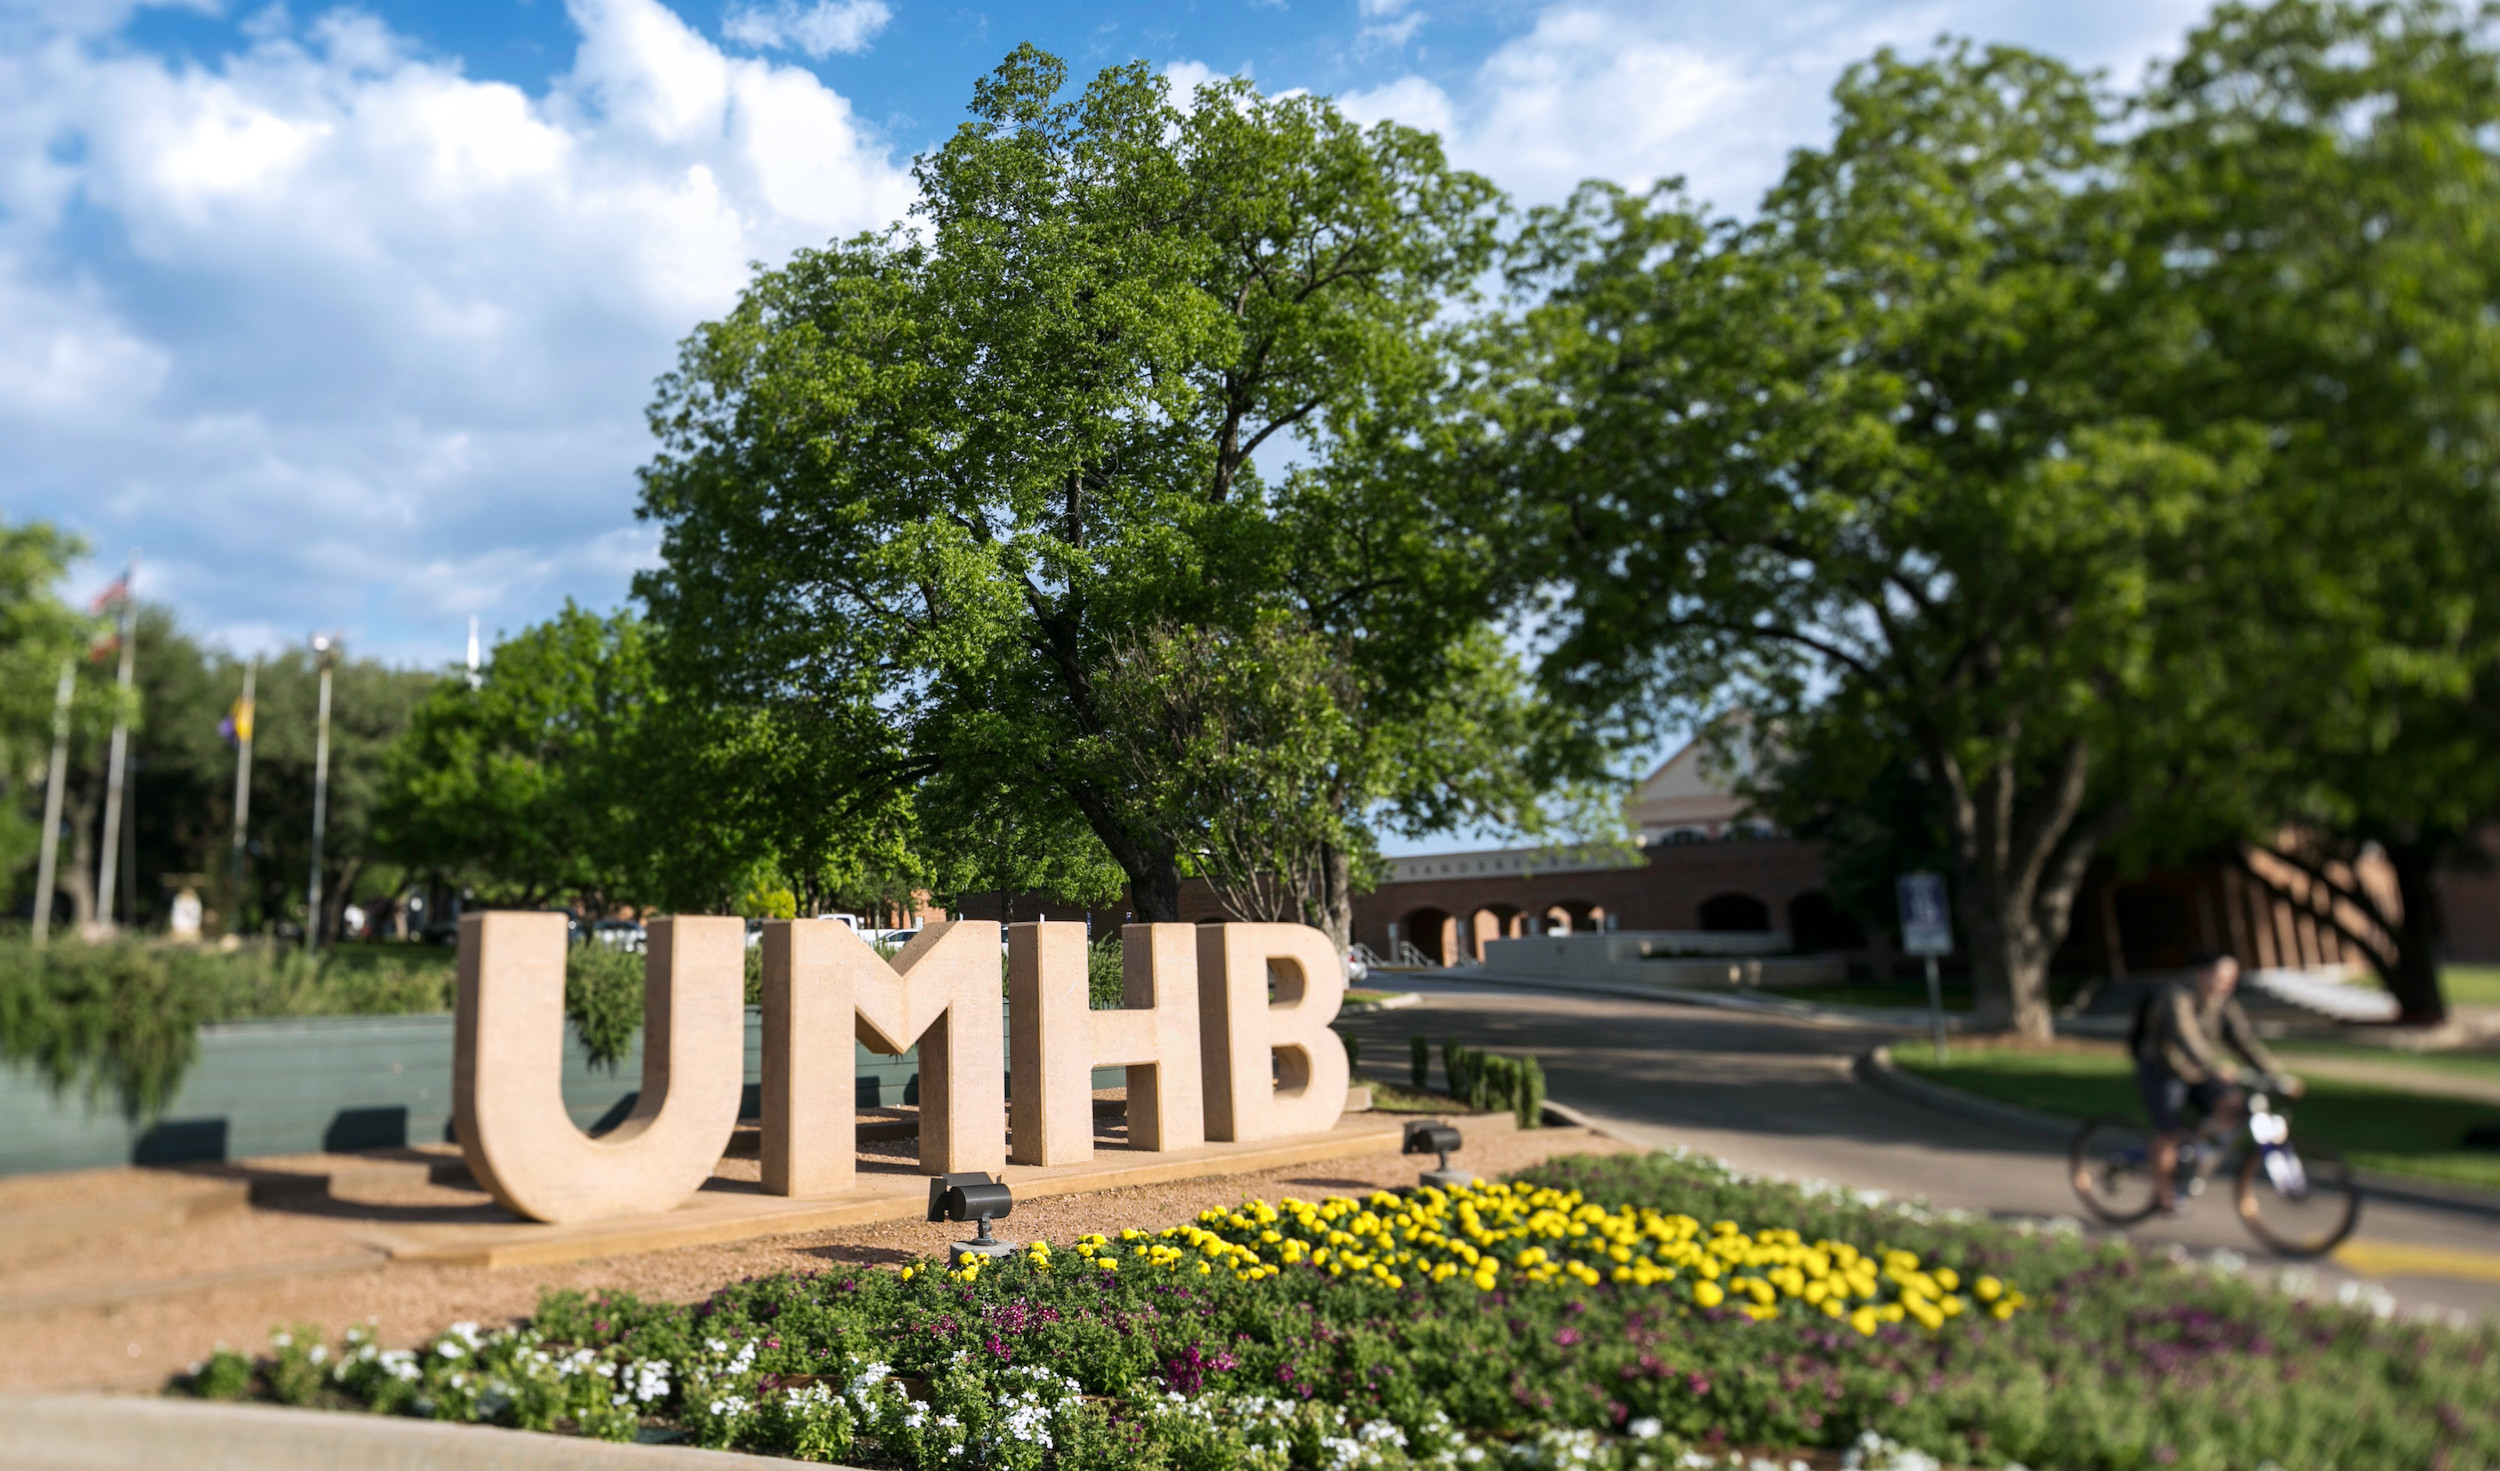 UMHB letters sign in front of one of their buildings